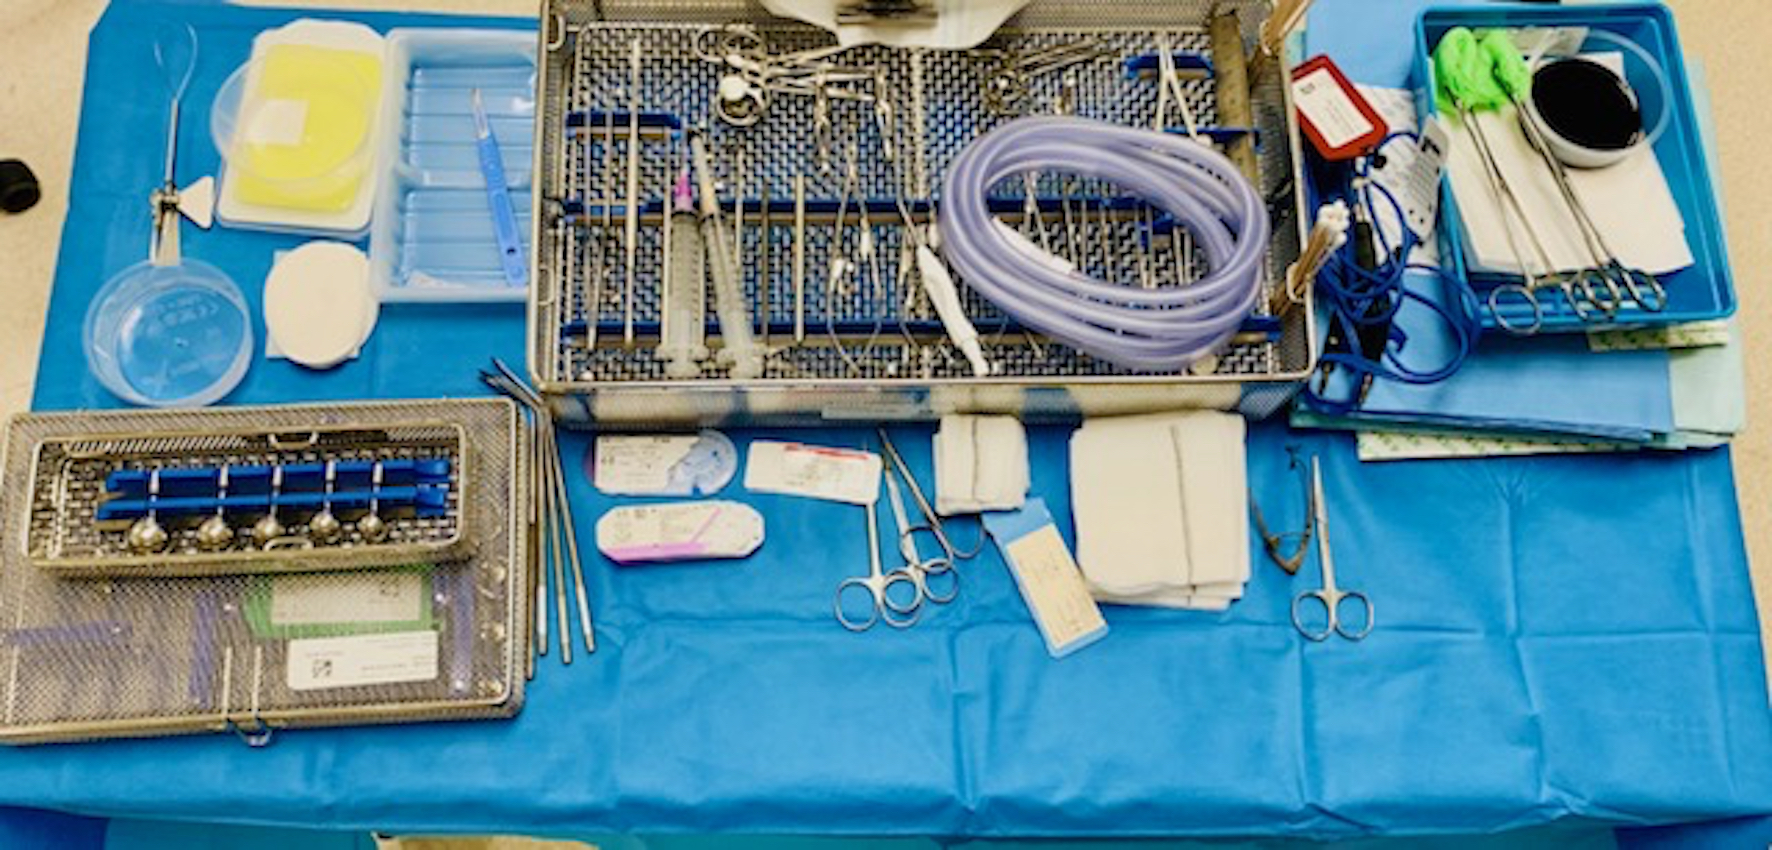 Equipment for enucleation procedure.